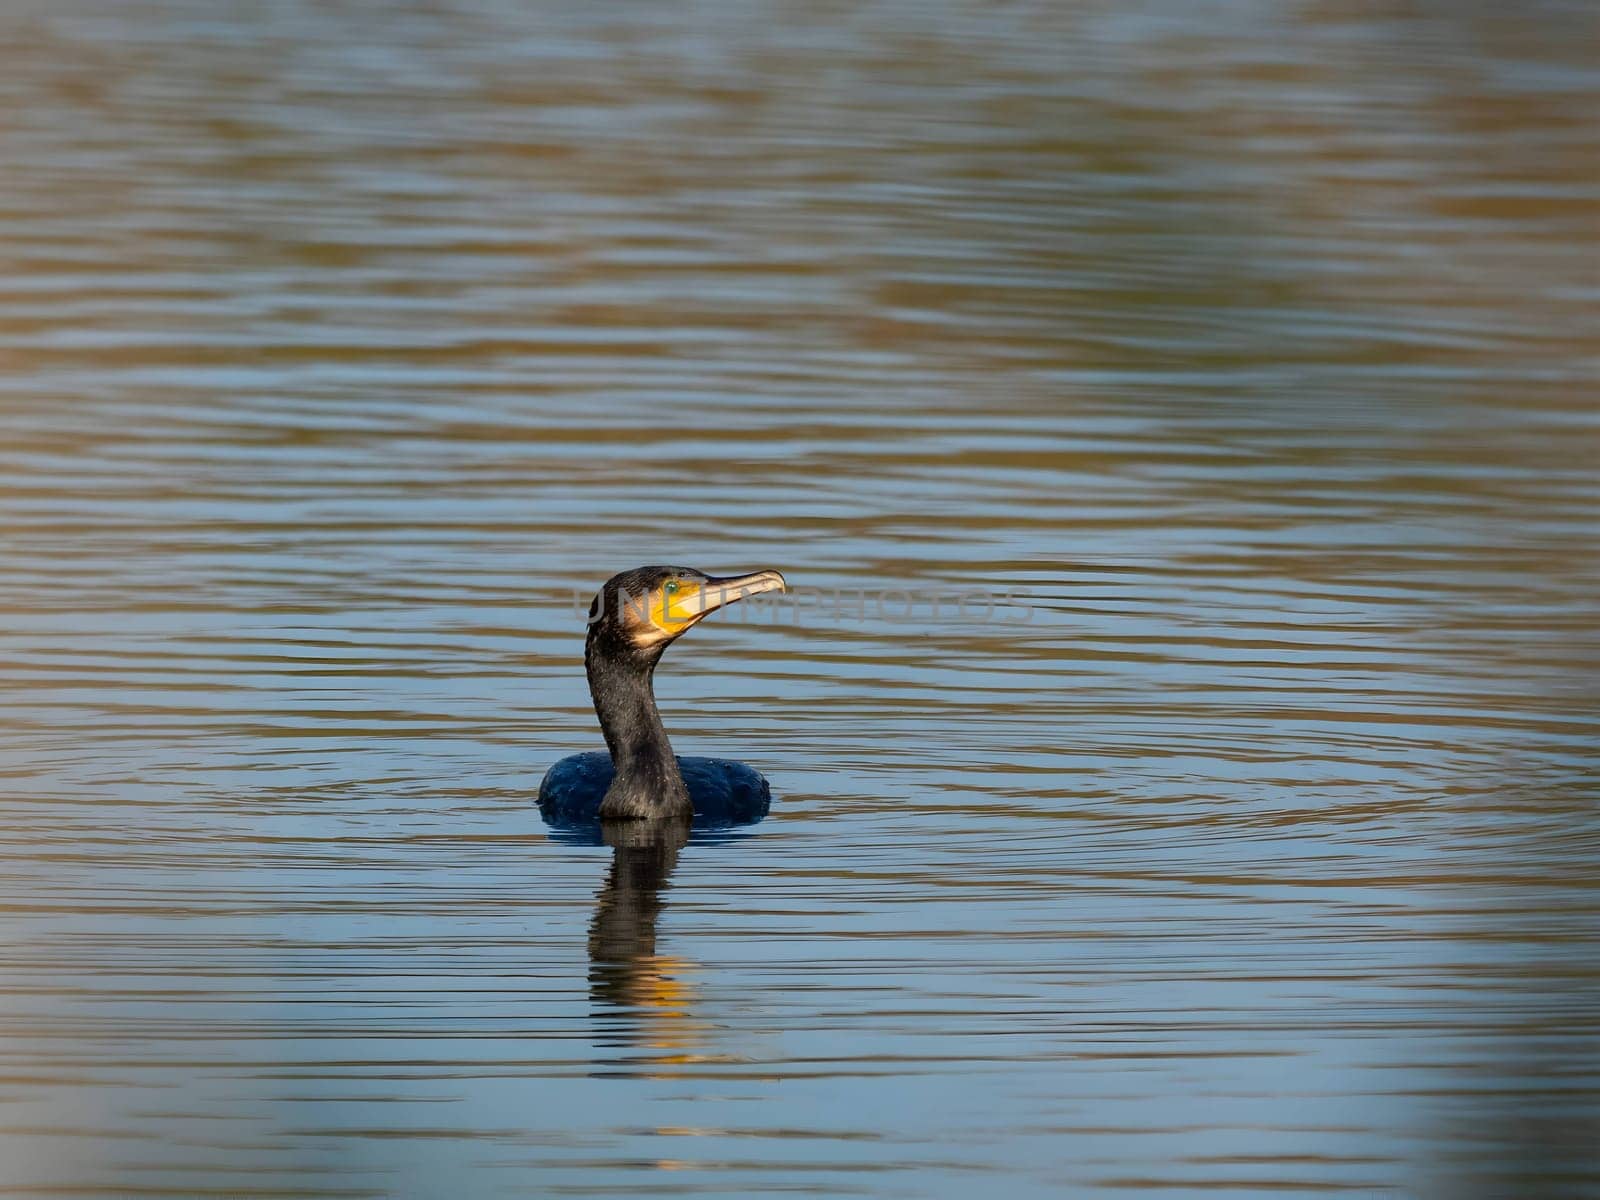 The elegant great cormorant glides gracefully on the water's surface, its dark feathers glistening in the sunlight, as it effortlessly moves through its aquatic realm.